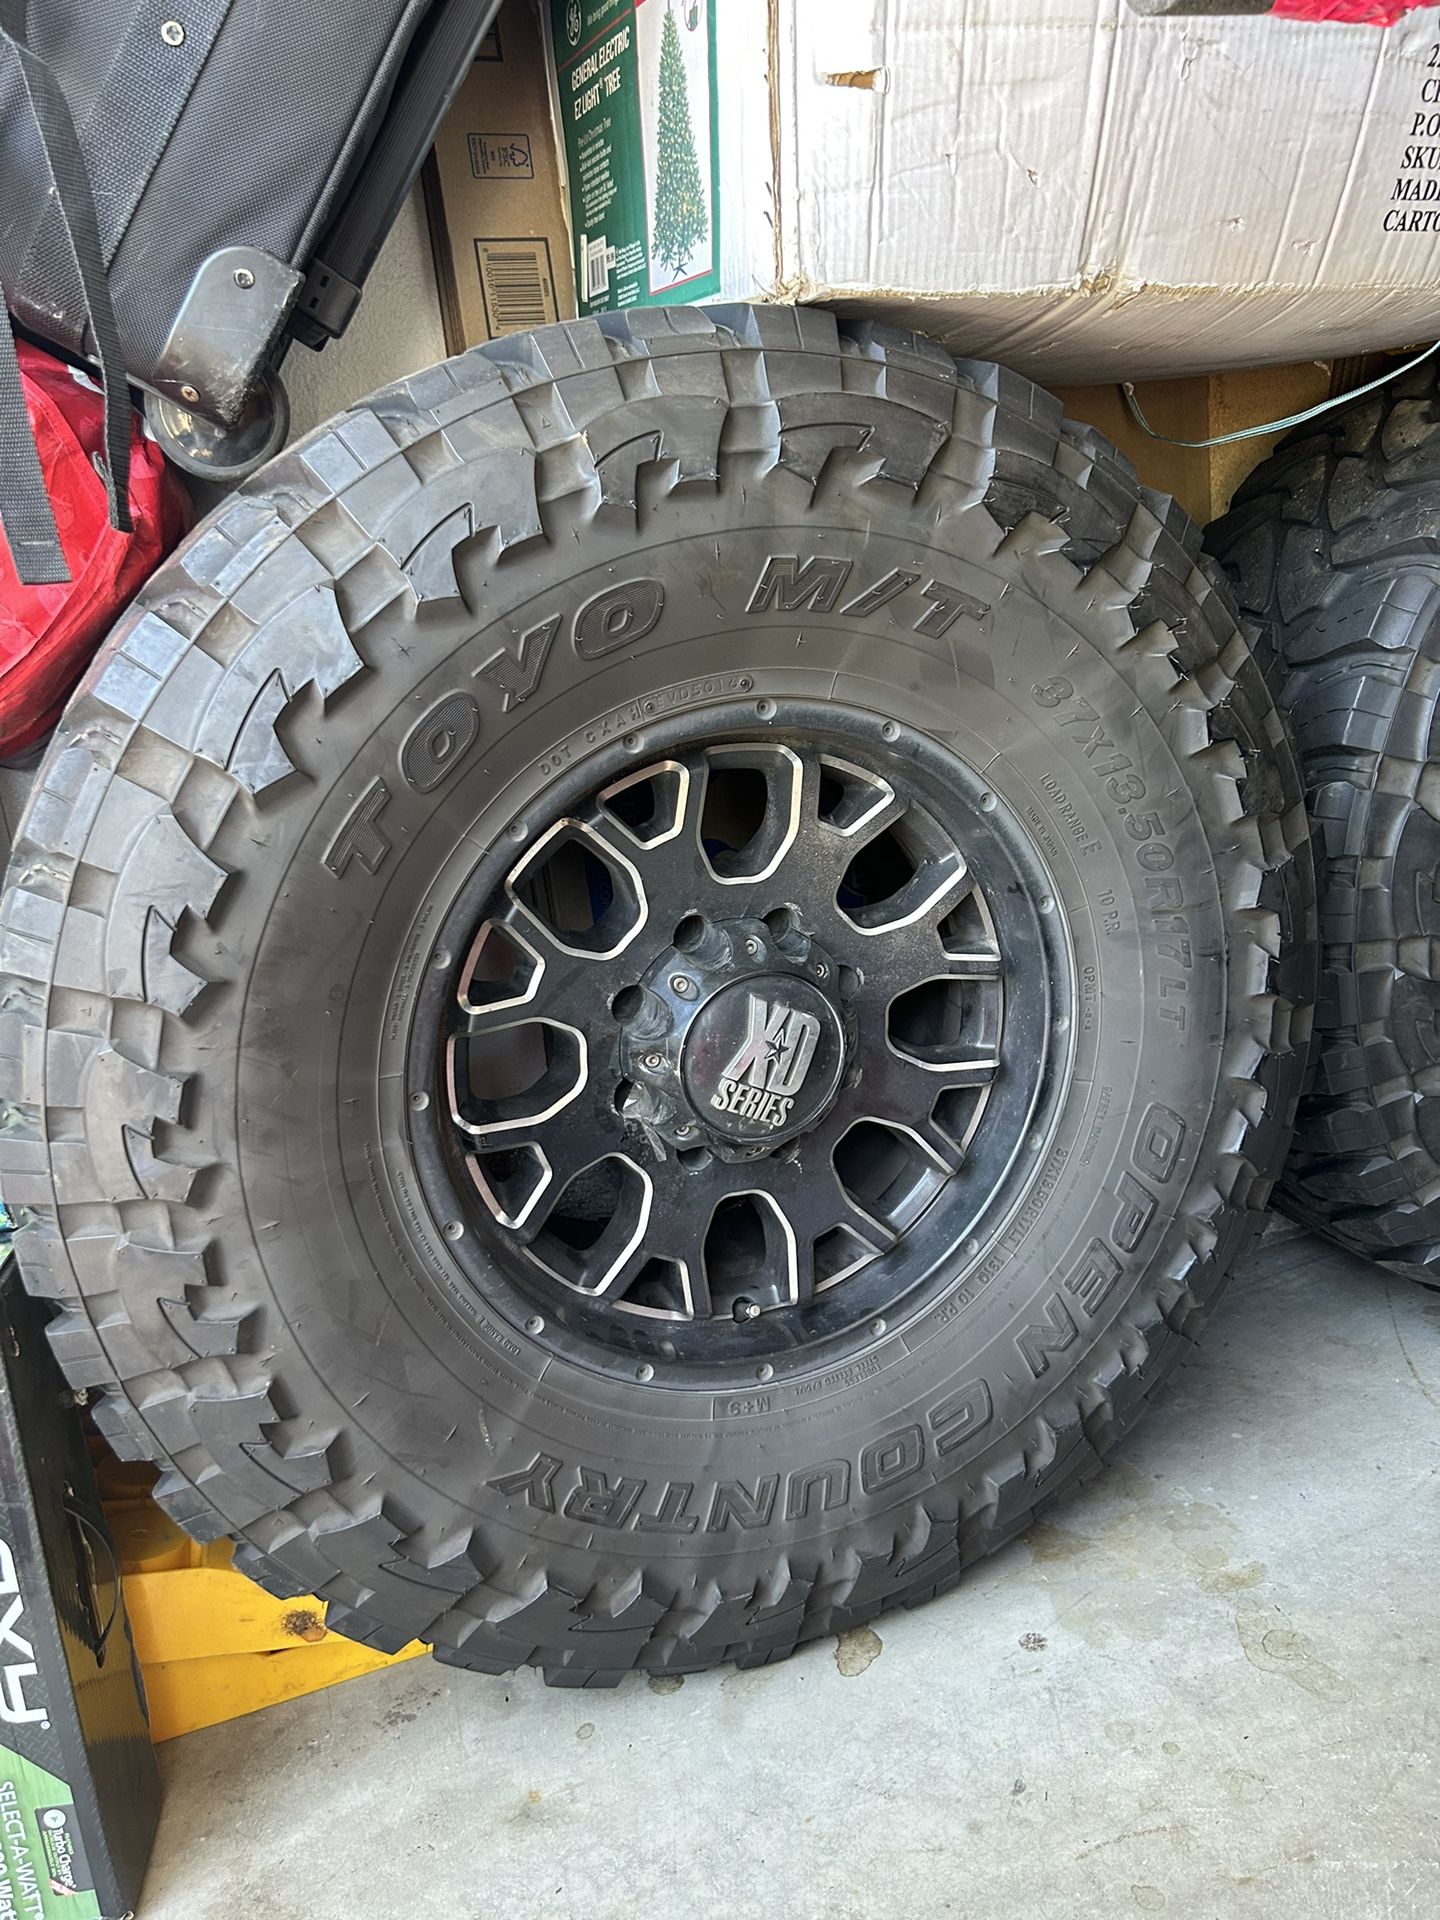 Truck Tire They Are Very Good Fits With 3500 Truck And 25000 